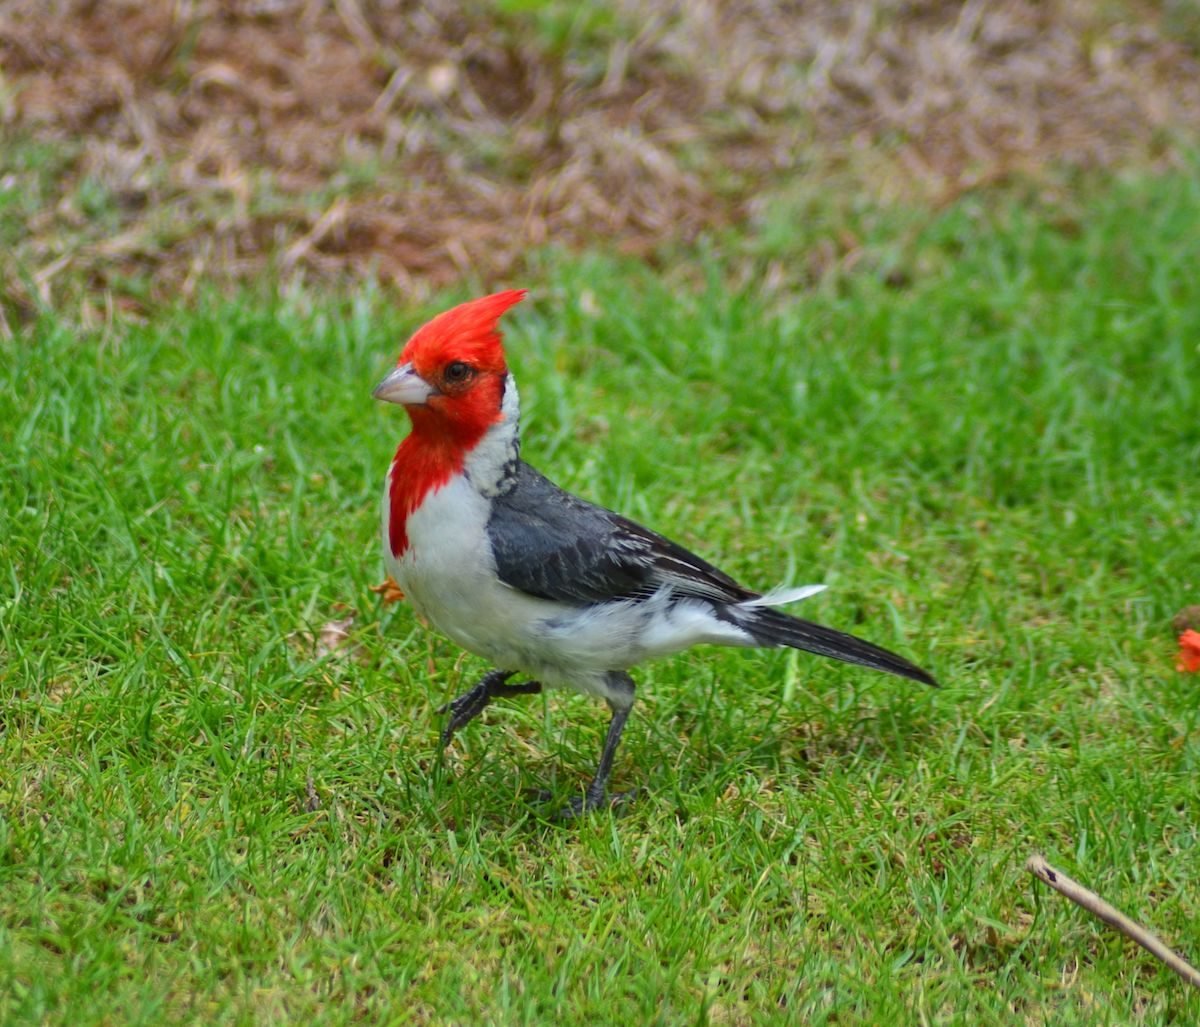 Head to Hawaii to See a Red Crested Cardinal